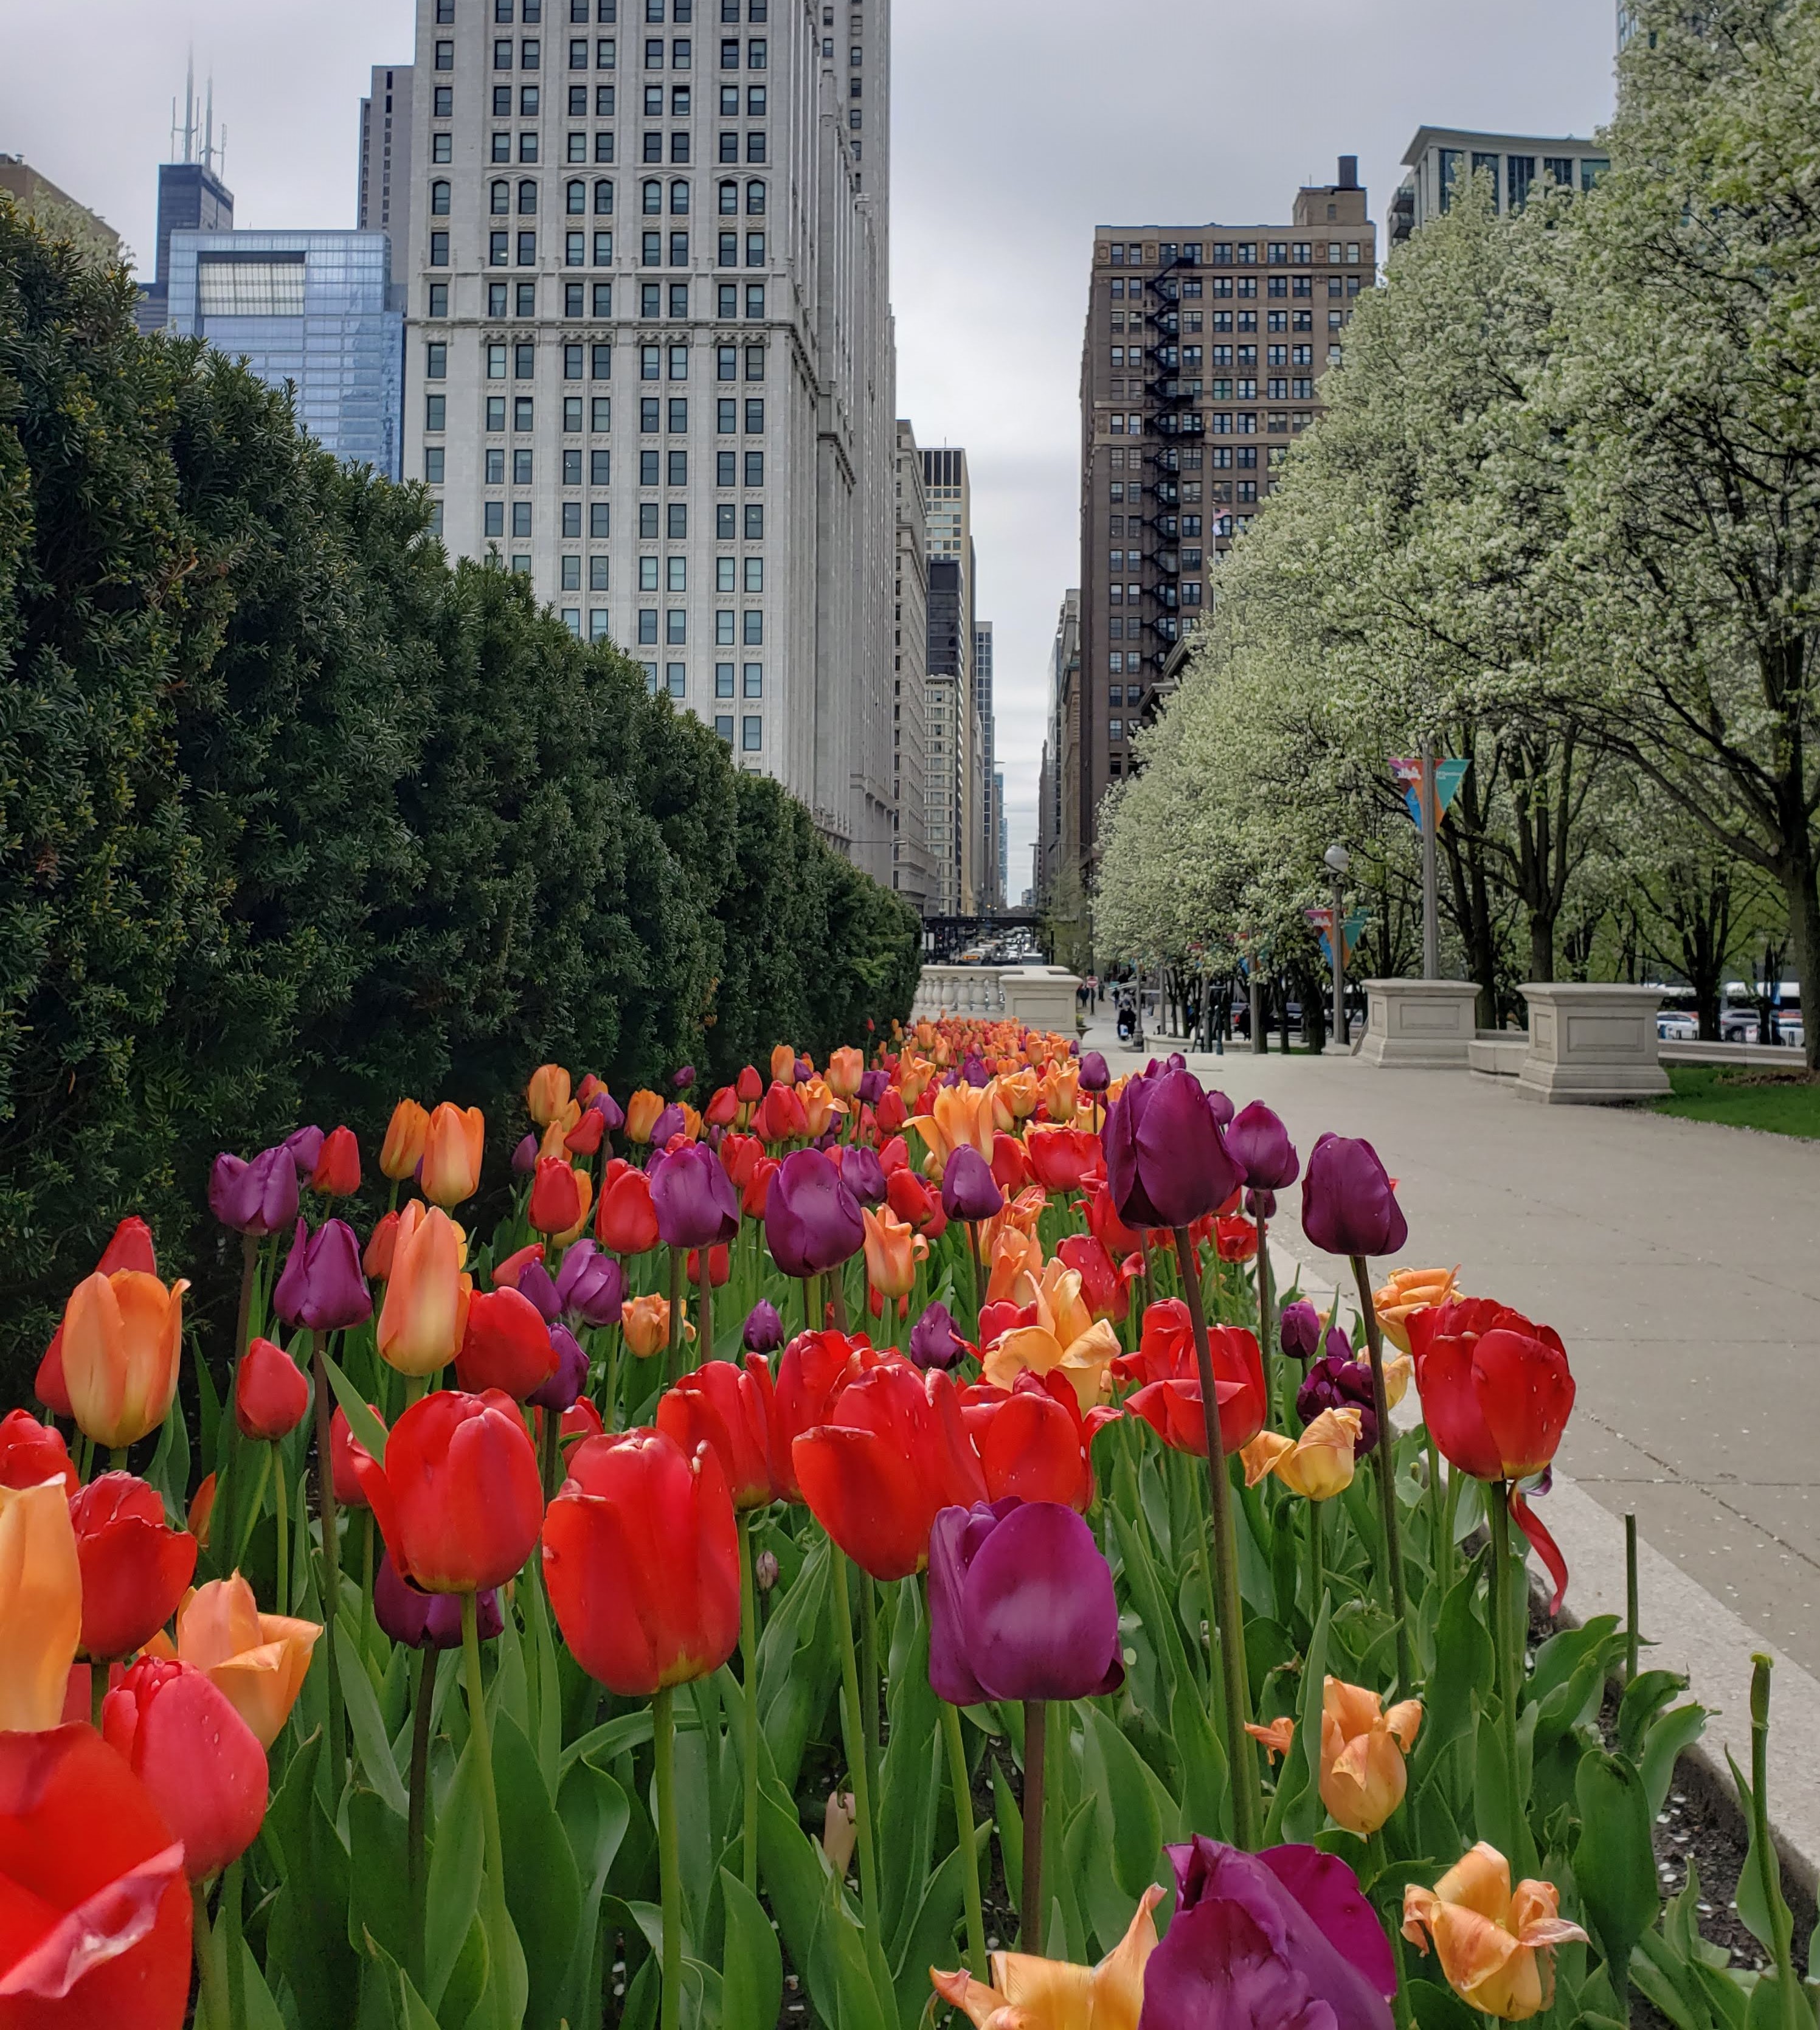 Tulips near Millennium Park during a cloudy Spring afternoon